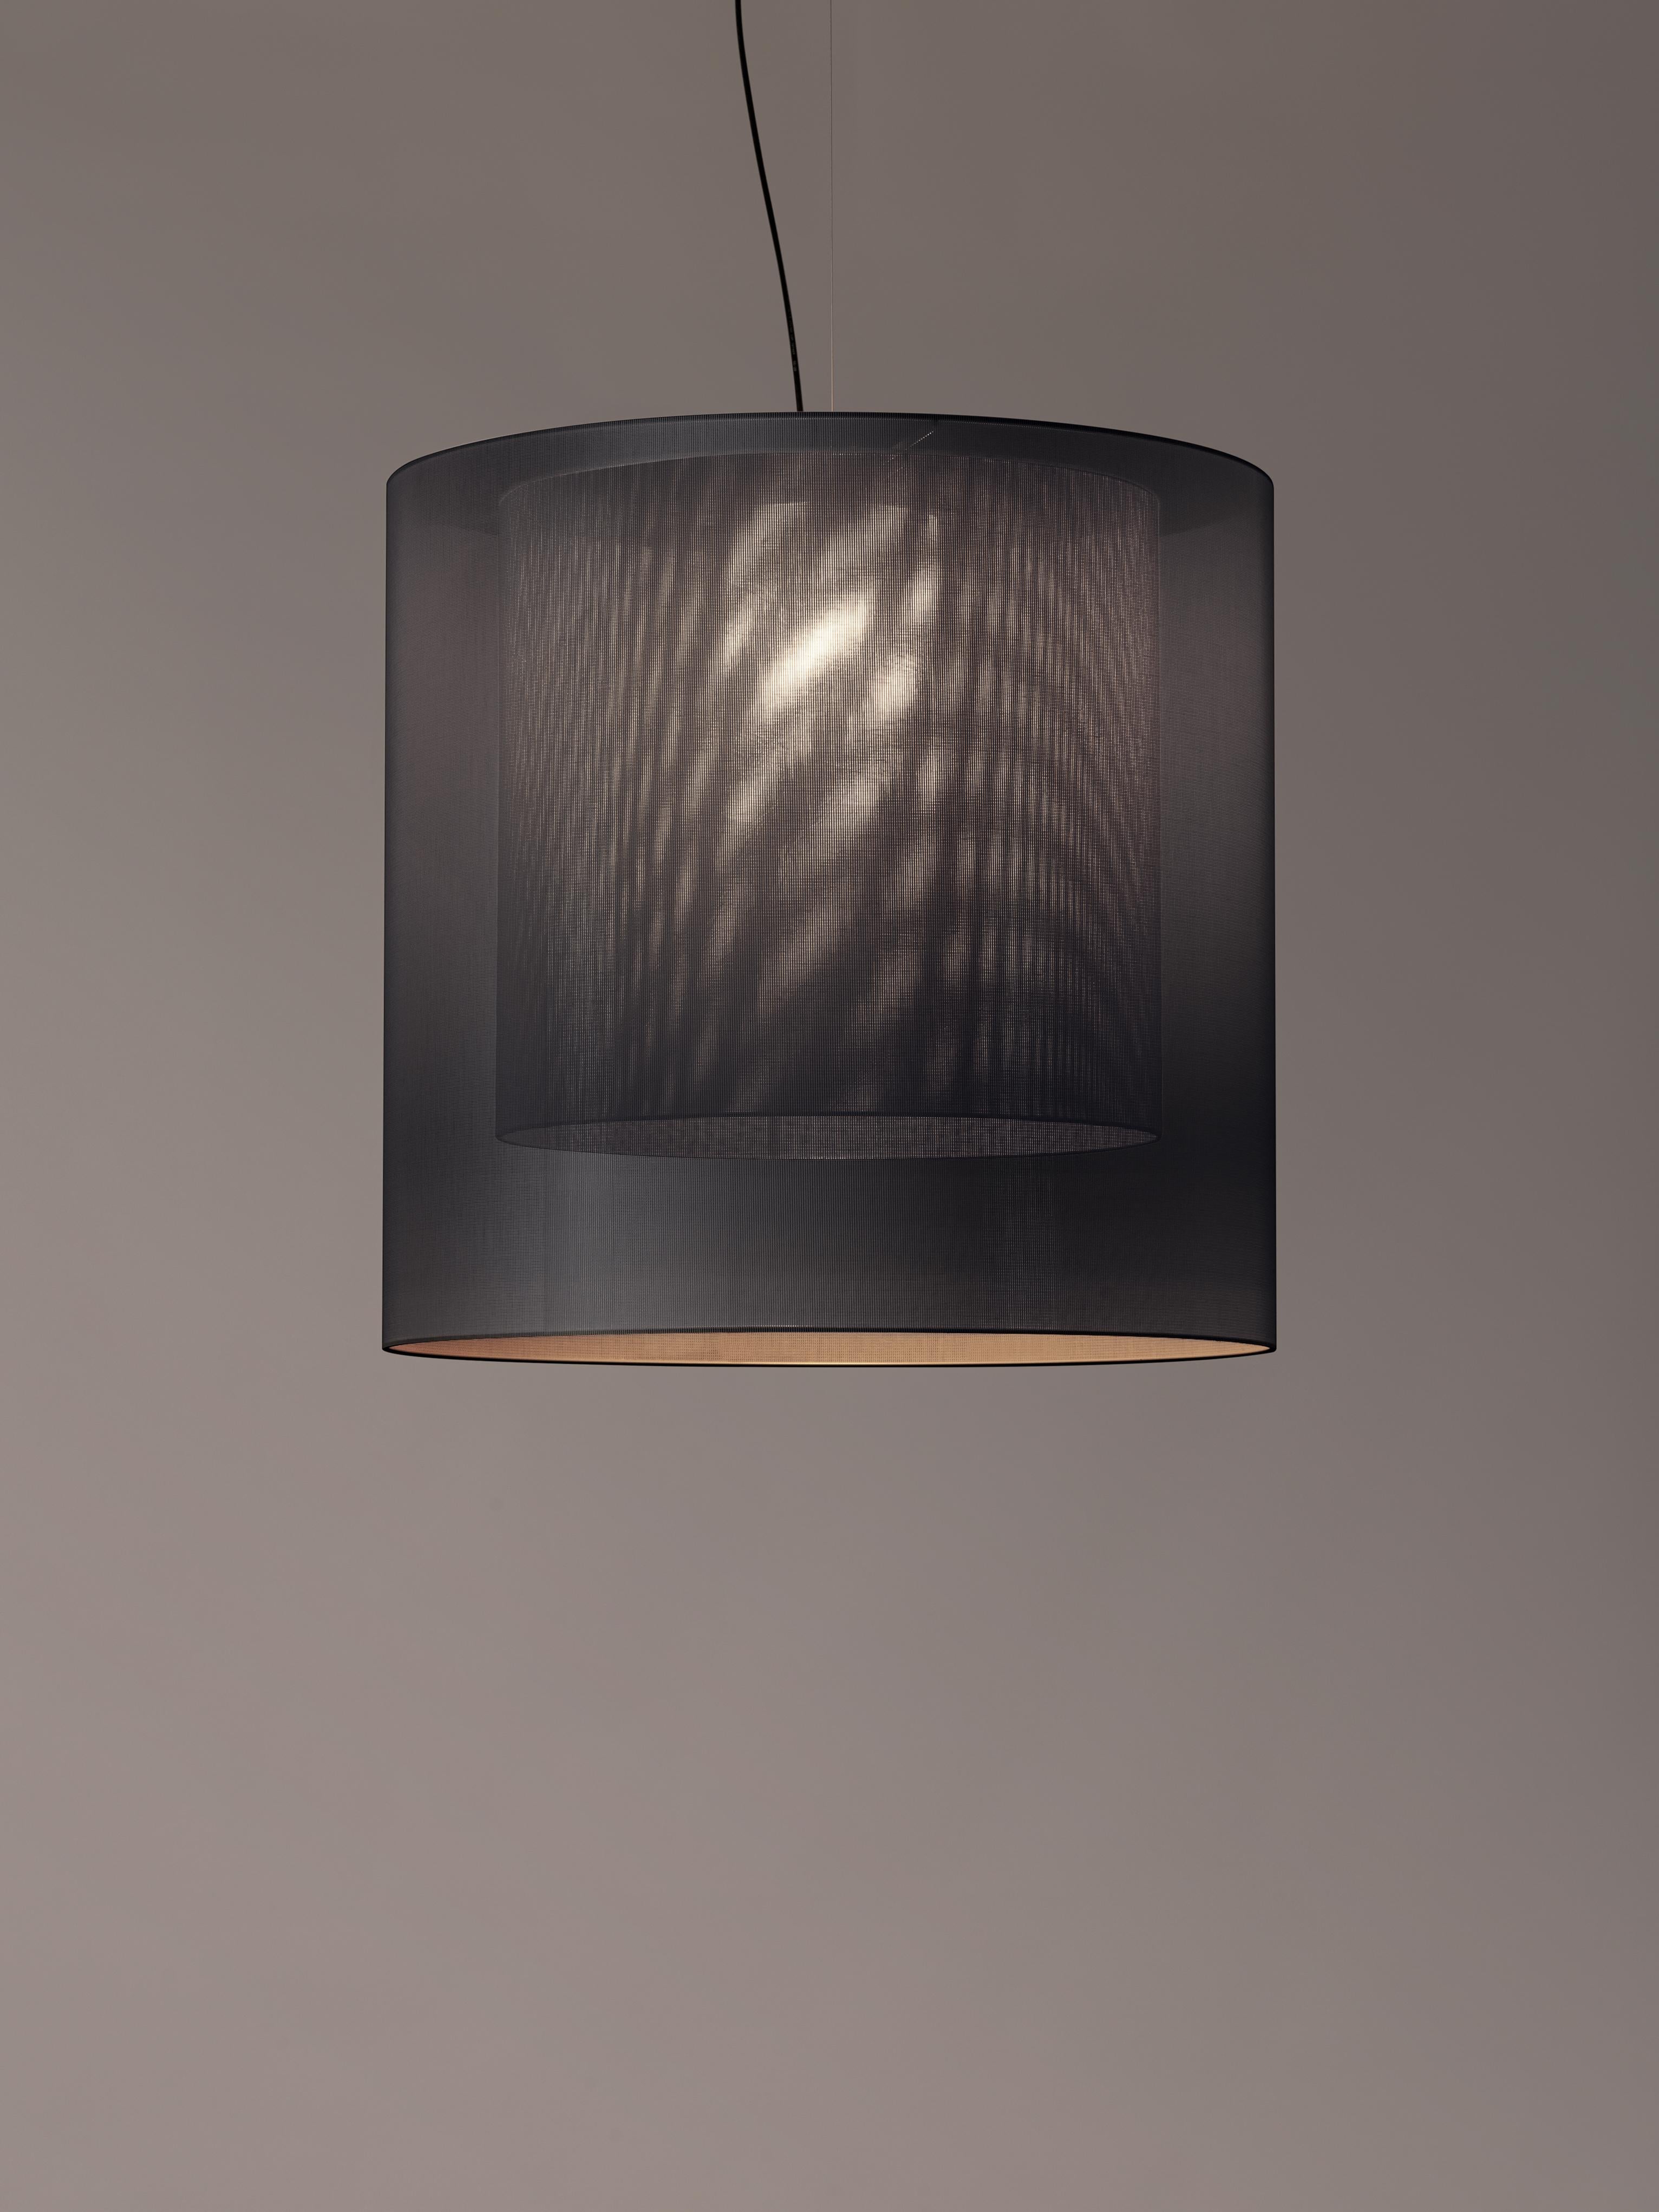 Grey and black Moaré XL pendant lamp by Antoni Arola.
Dimensions: D 83 x H 81 cm.
Materials: metal, polyester.
Available in other colors and sizes.

Moaré’s multiple combinations of formats and colours make it highly versatile. The series takes